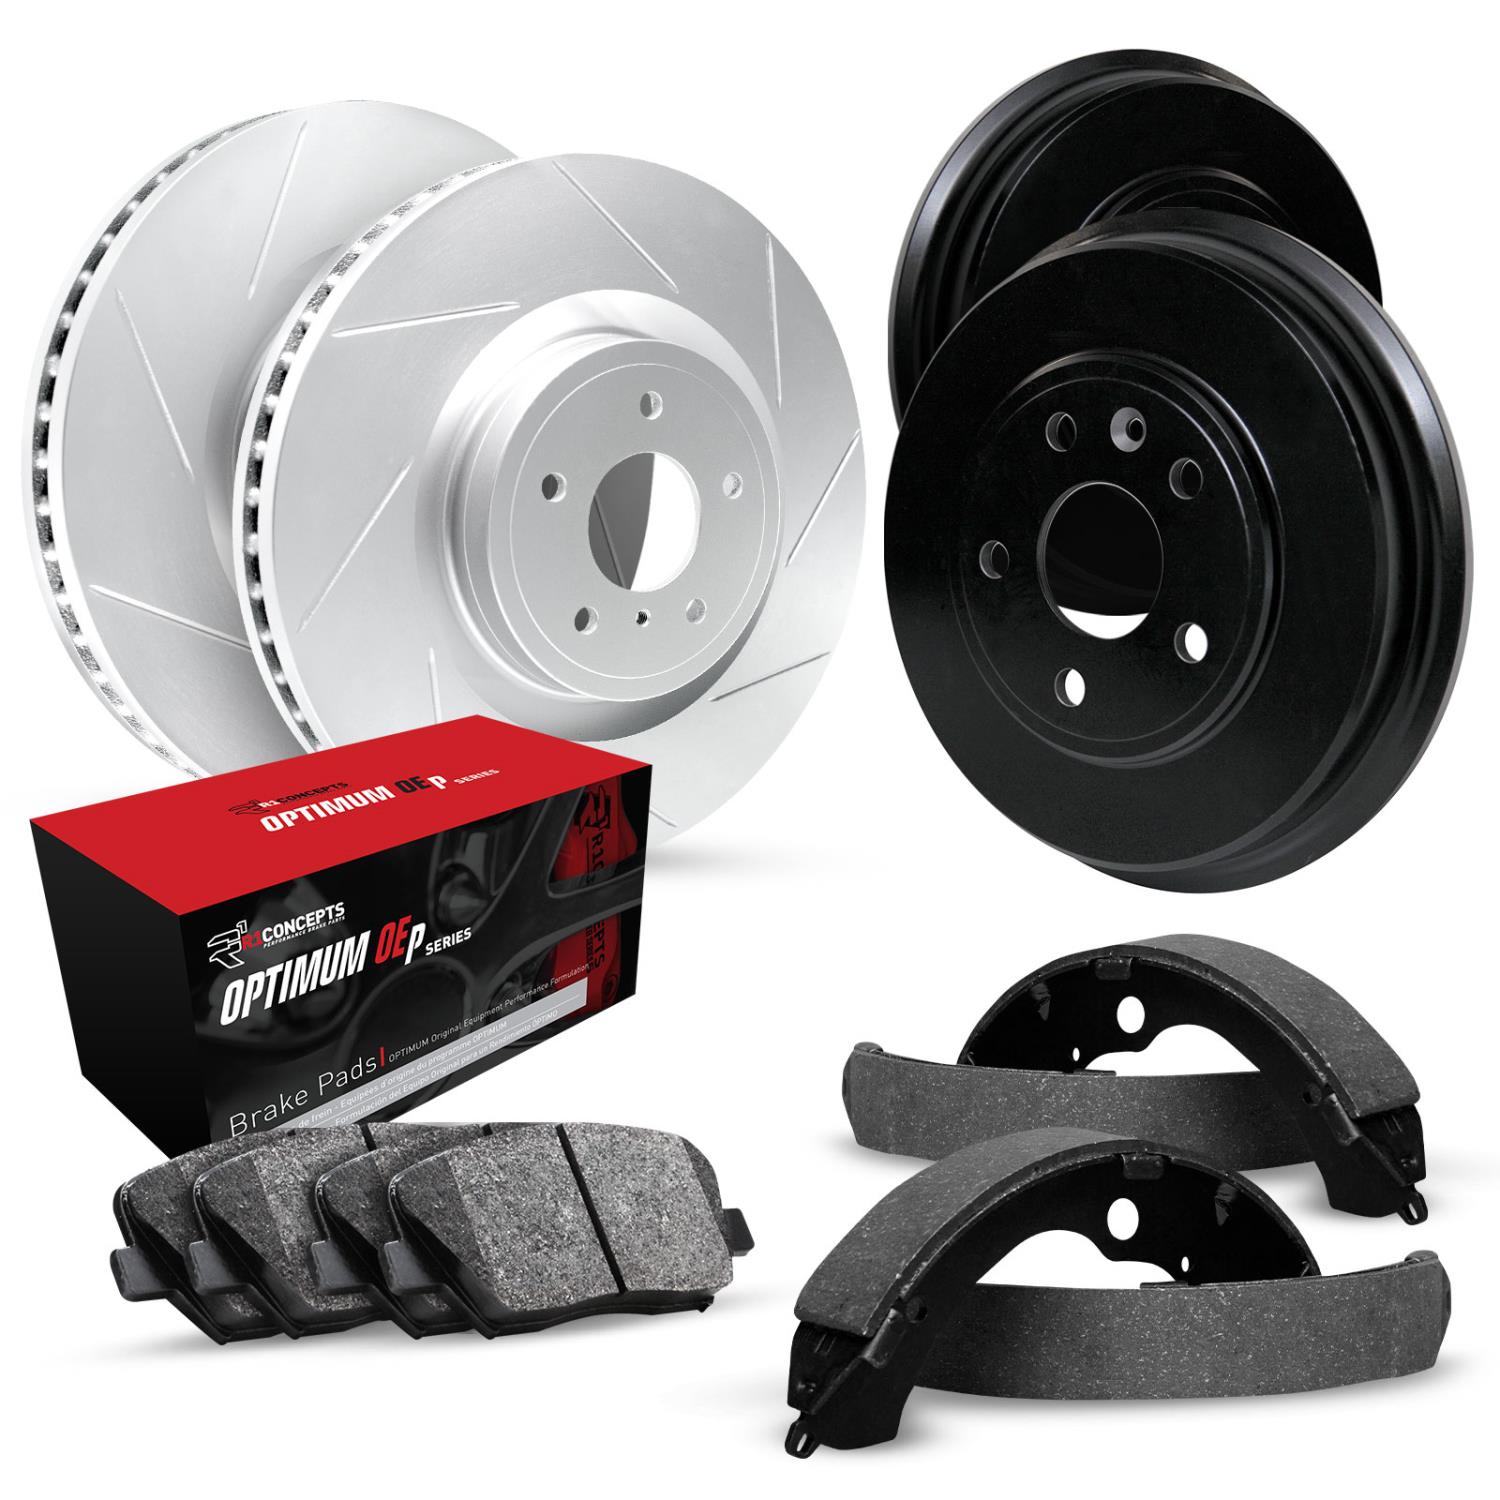 GEO-Carbon Slotted Brake Rotor & Drum Set w/Optimum OE Pads & Shoes, 1971-1973 GM, Position: Front & Rear